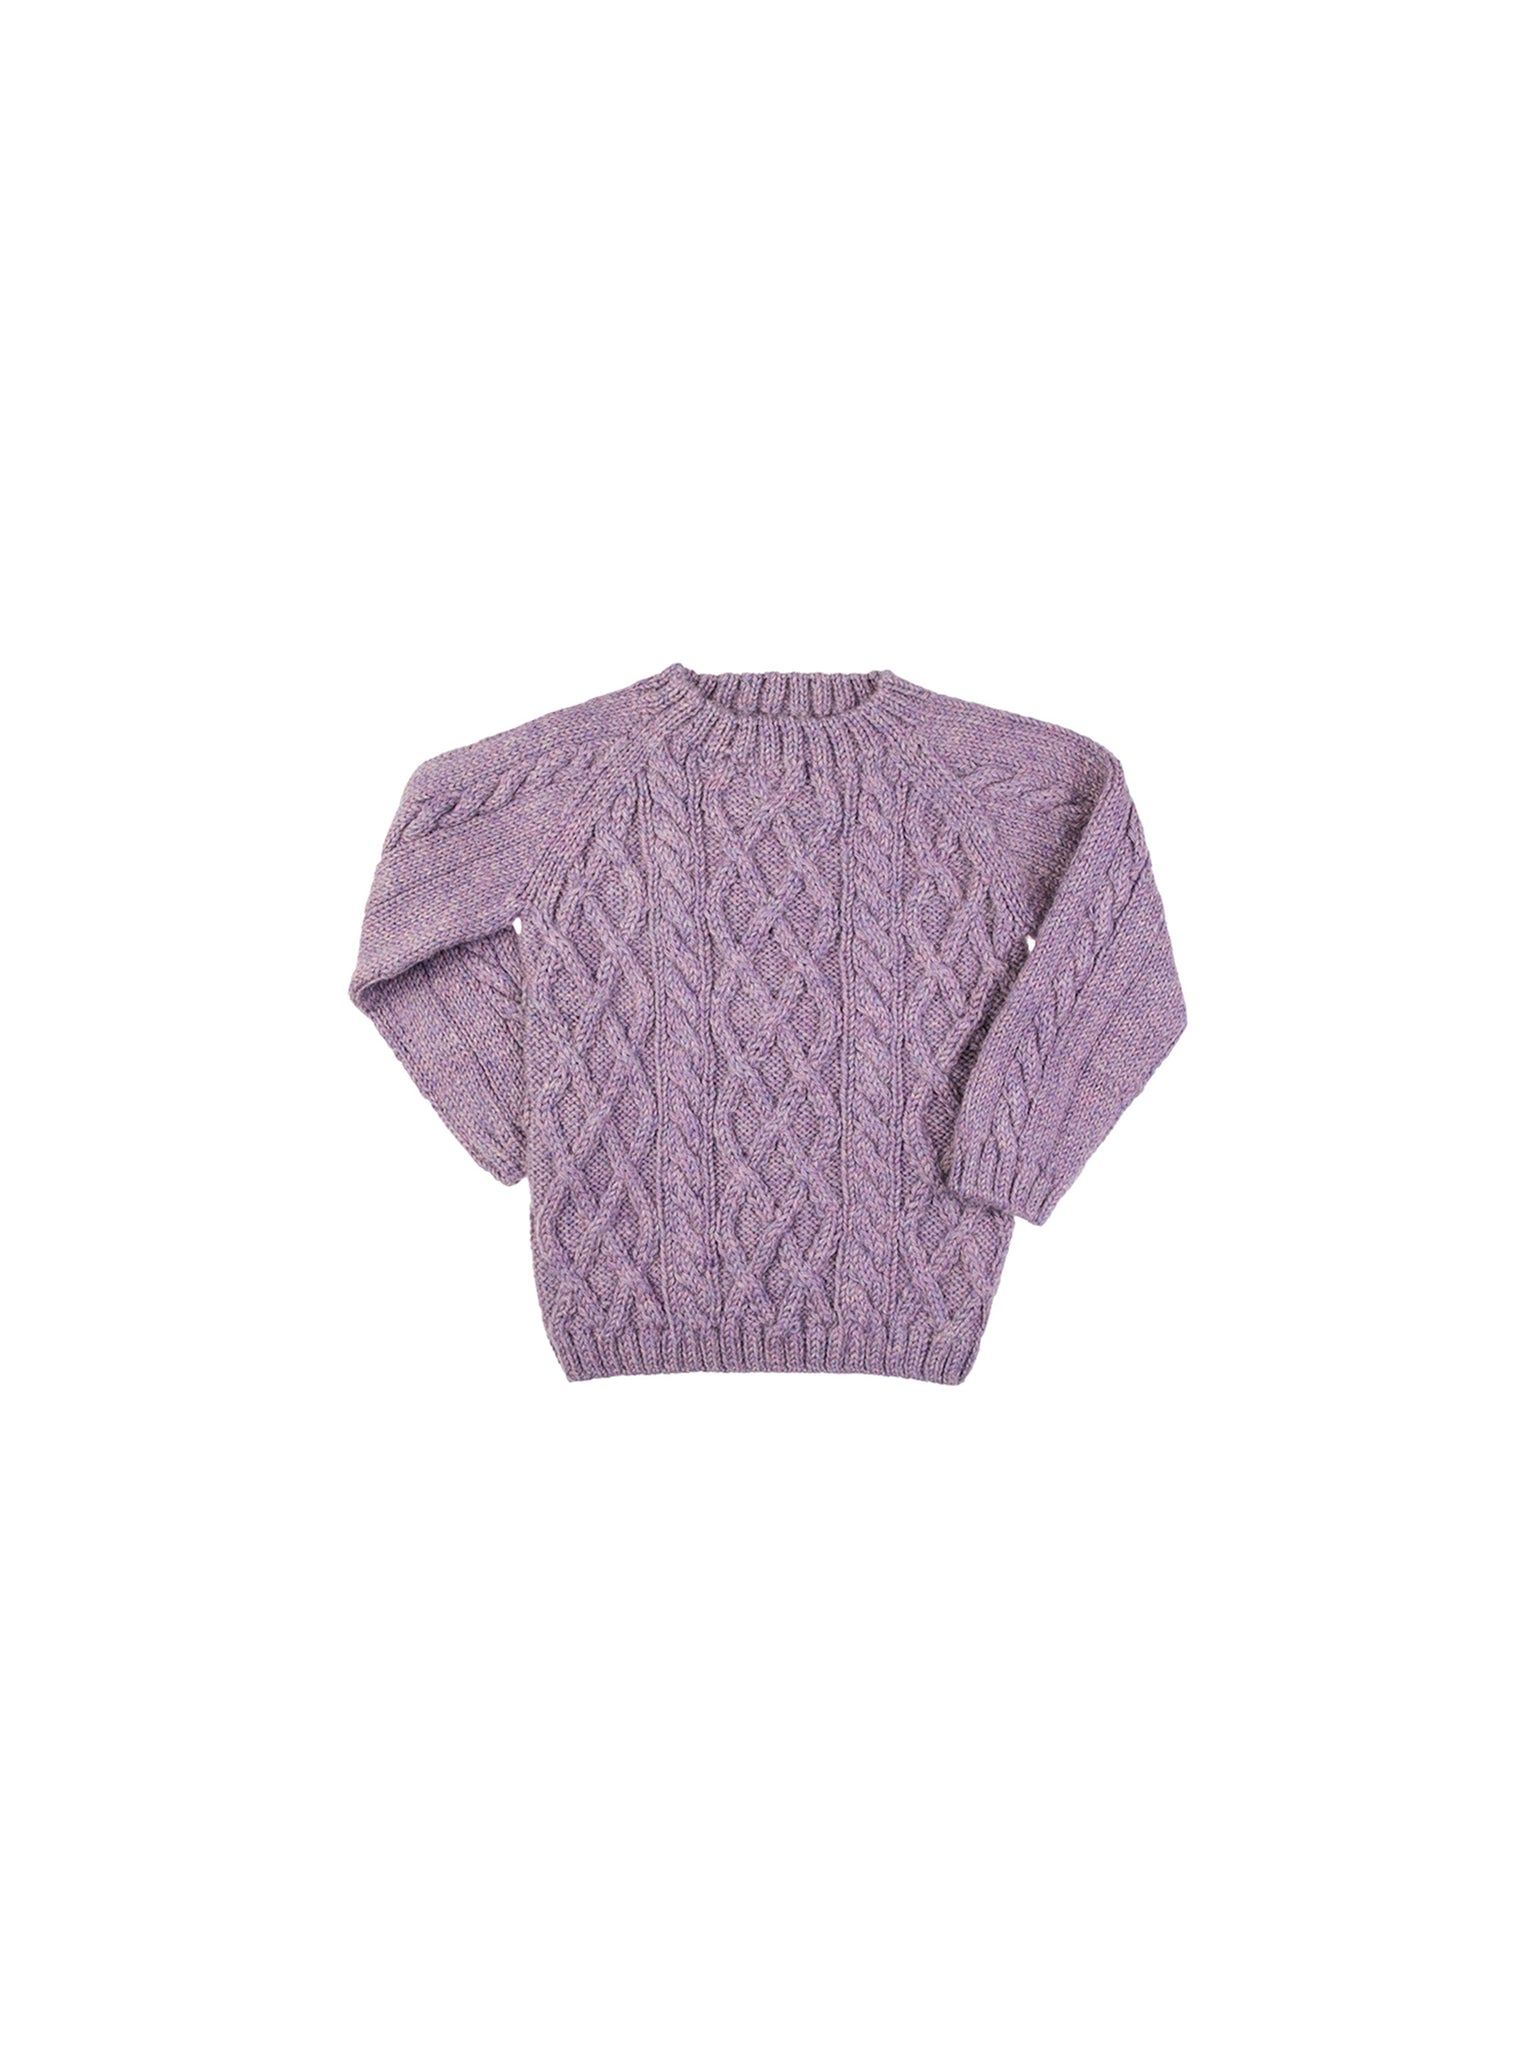 Baby Alpaca Lilac Cable Knit Sweater Weston Table